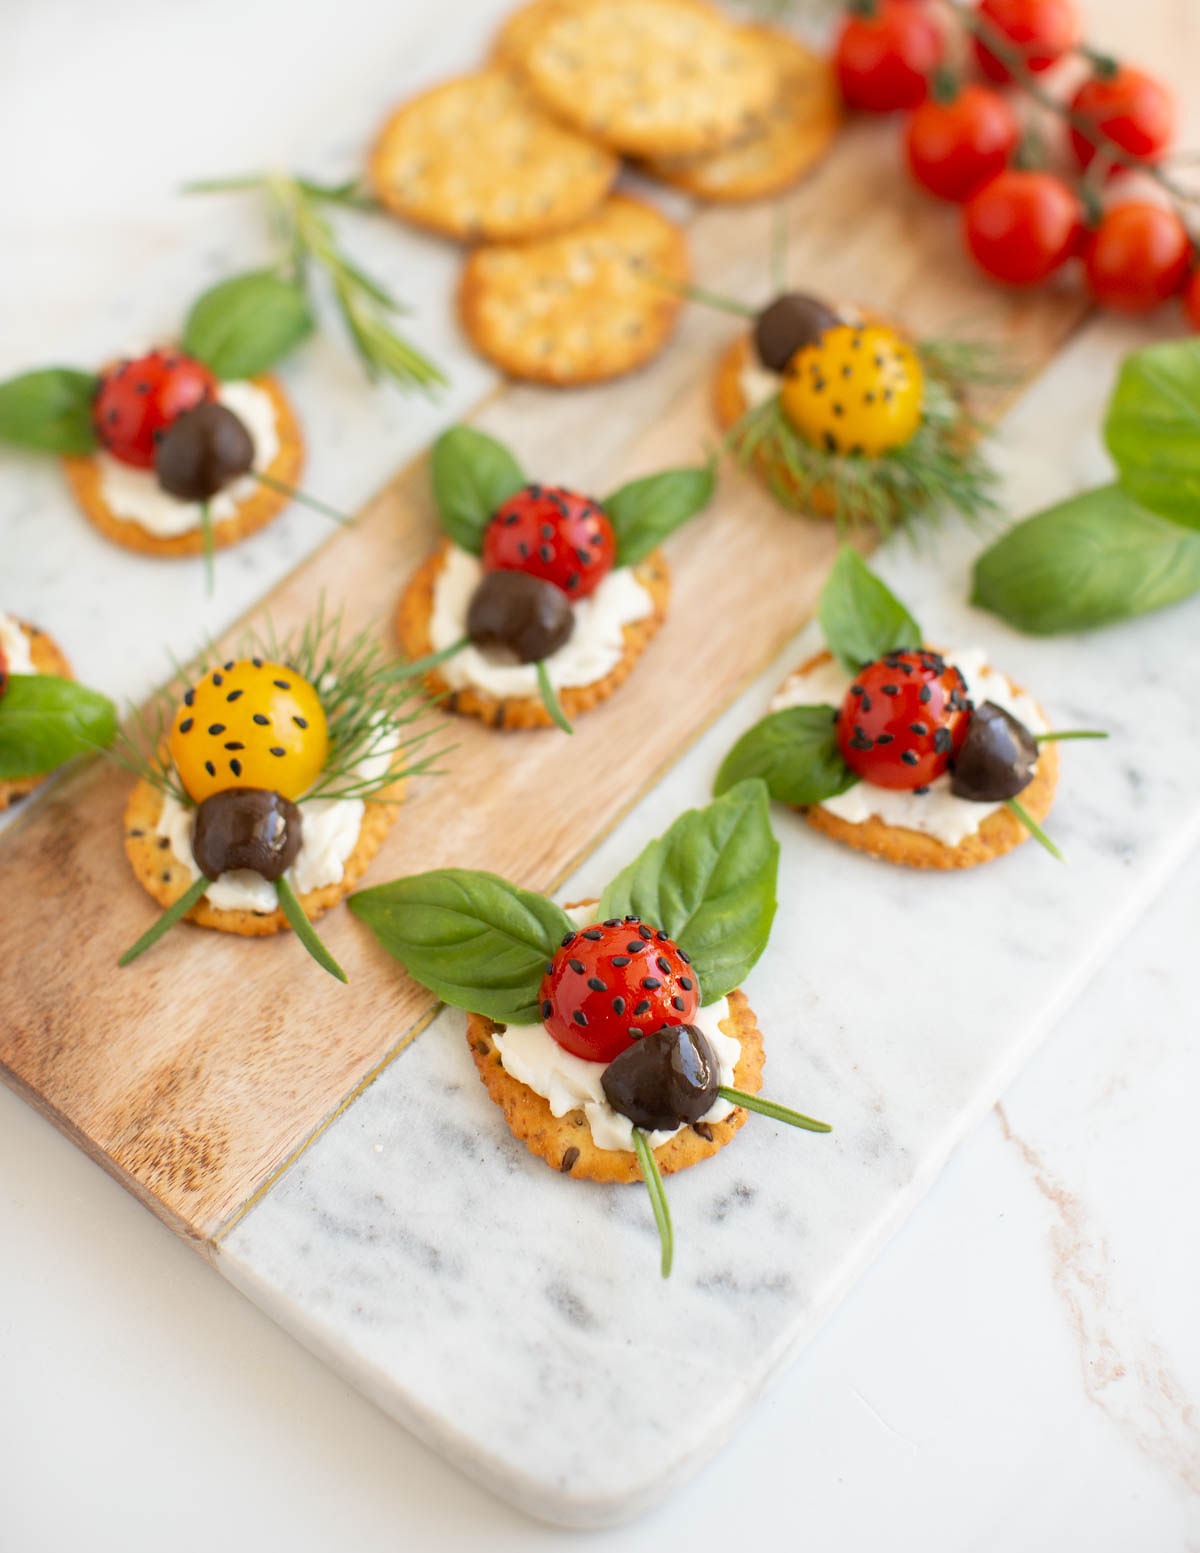 Crackers topped with vegan cream cheese, cherry tomatoes, black olives, basil, and chives to look like ladybugs.